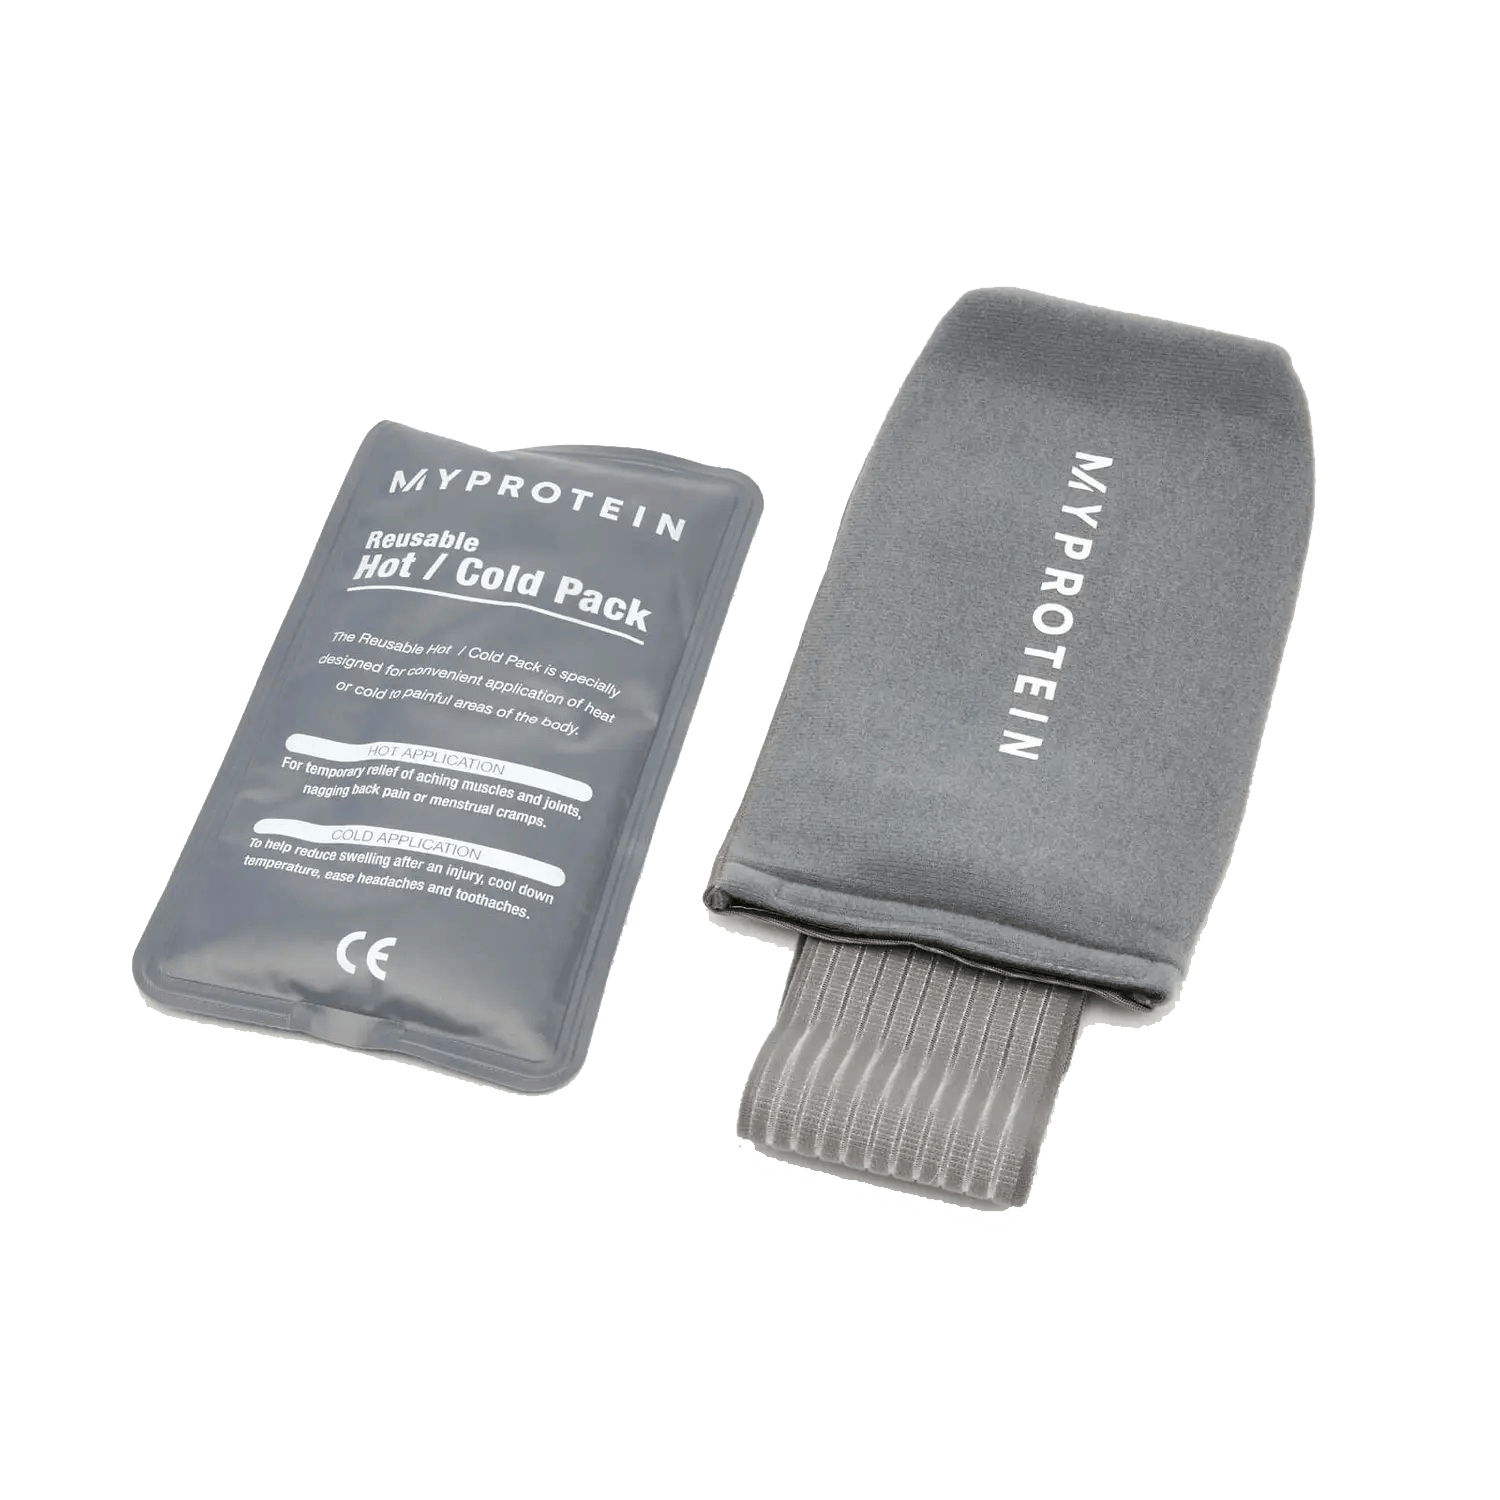 Reusable Heat Pad and Cold Compress